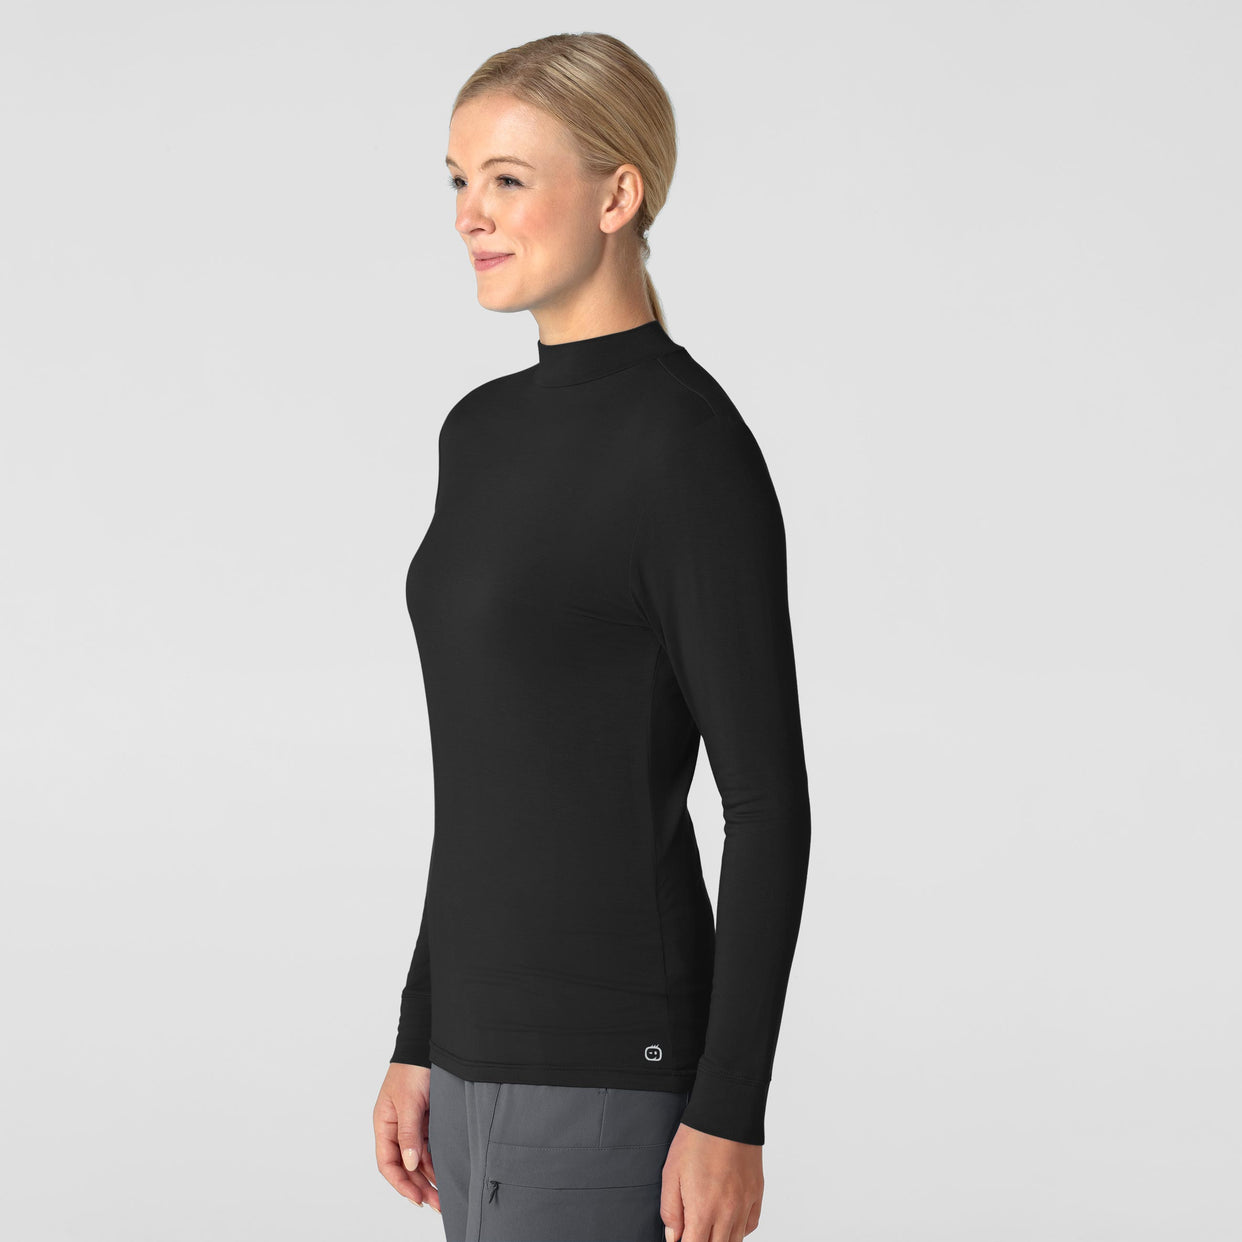 Knits and Layers Women’s Long Sleeve Mock Neck Silky Tee Black side view